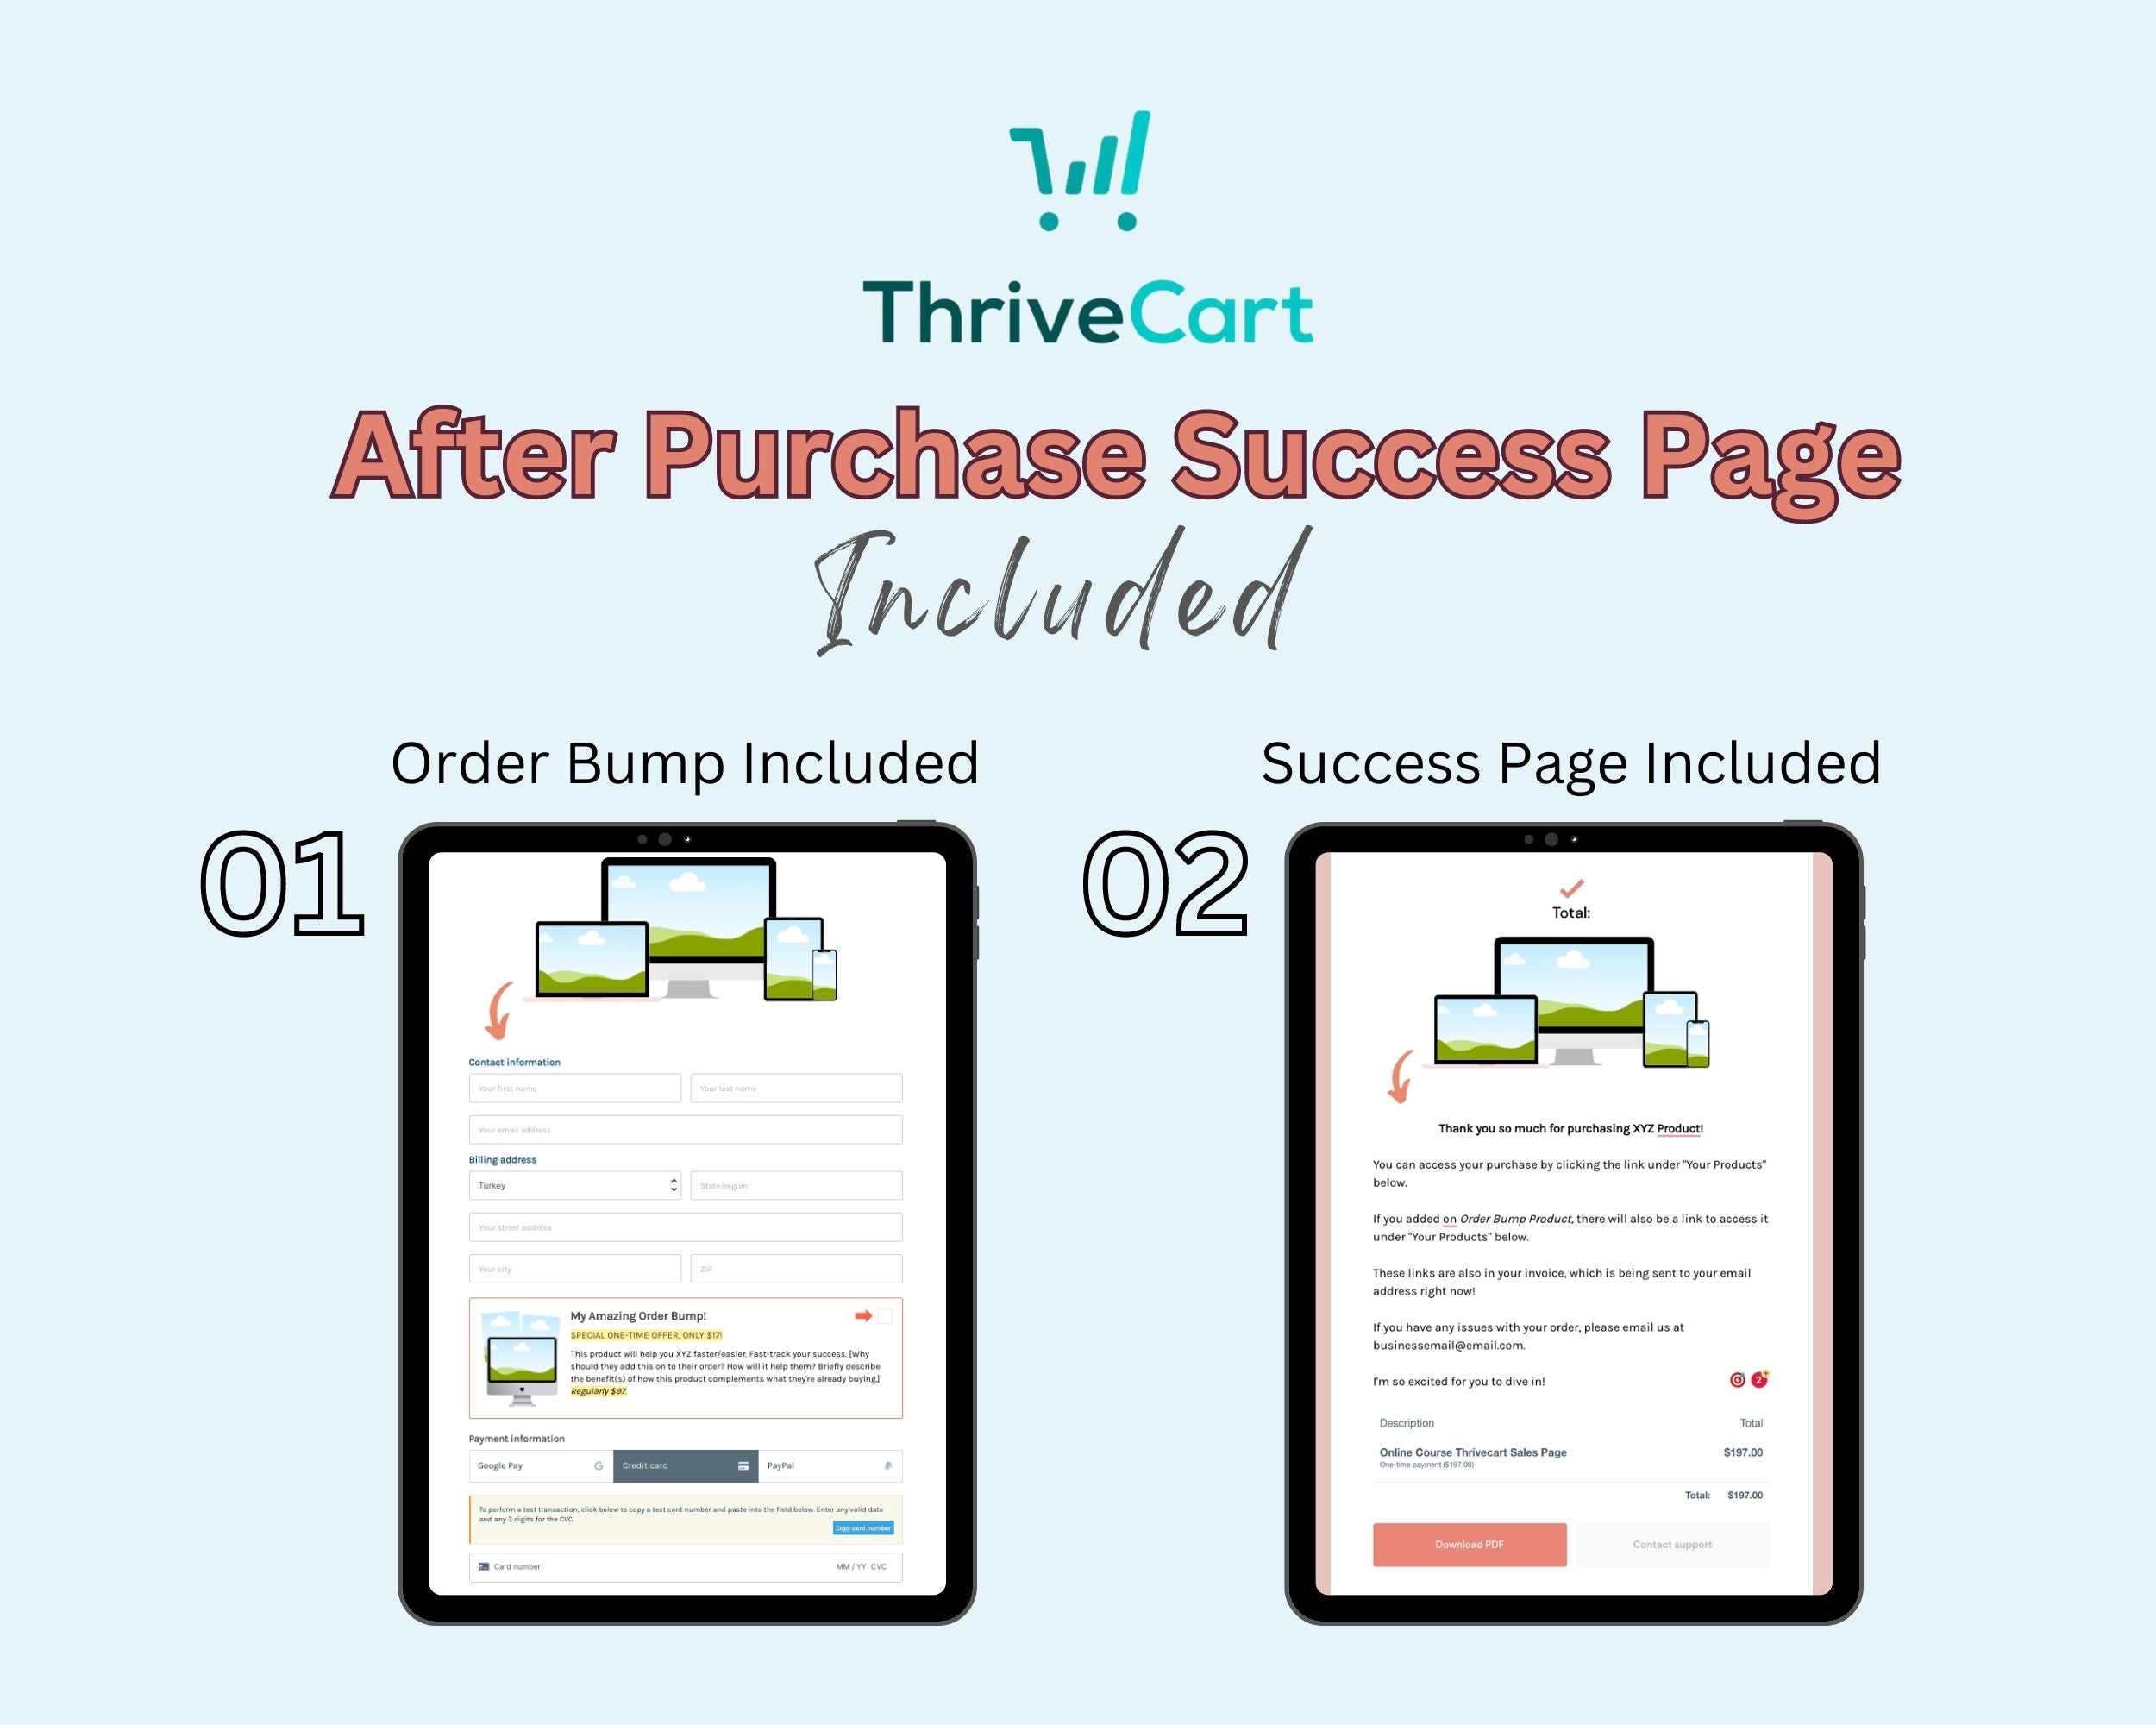 Online Course Sales Page Template in ThriveCart